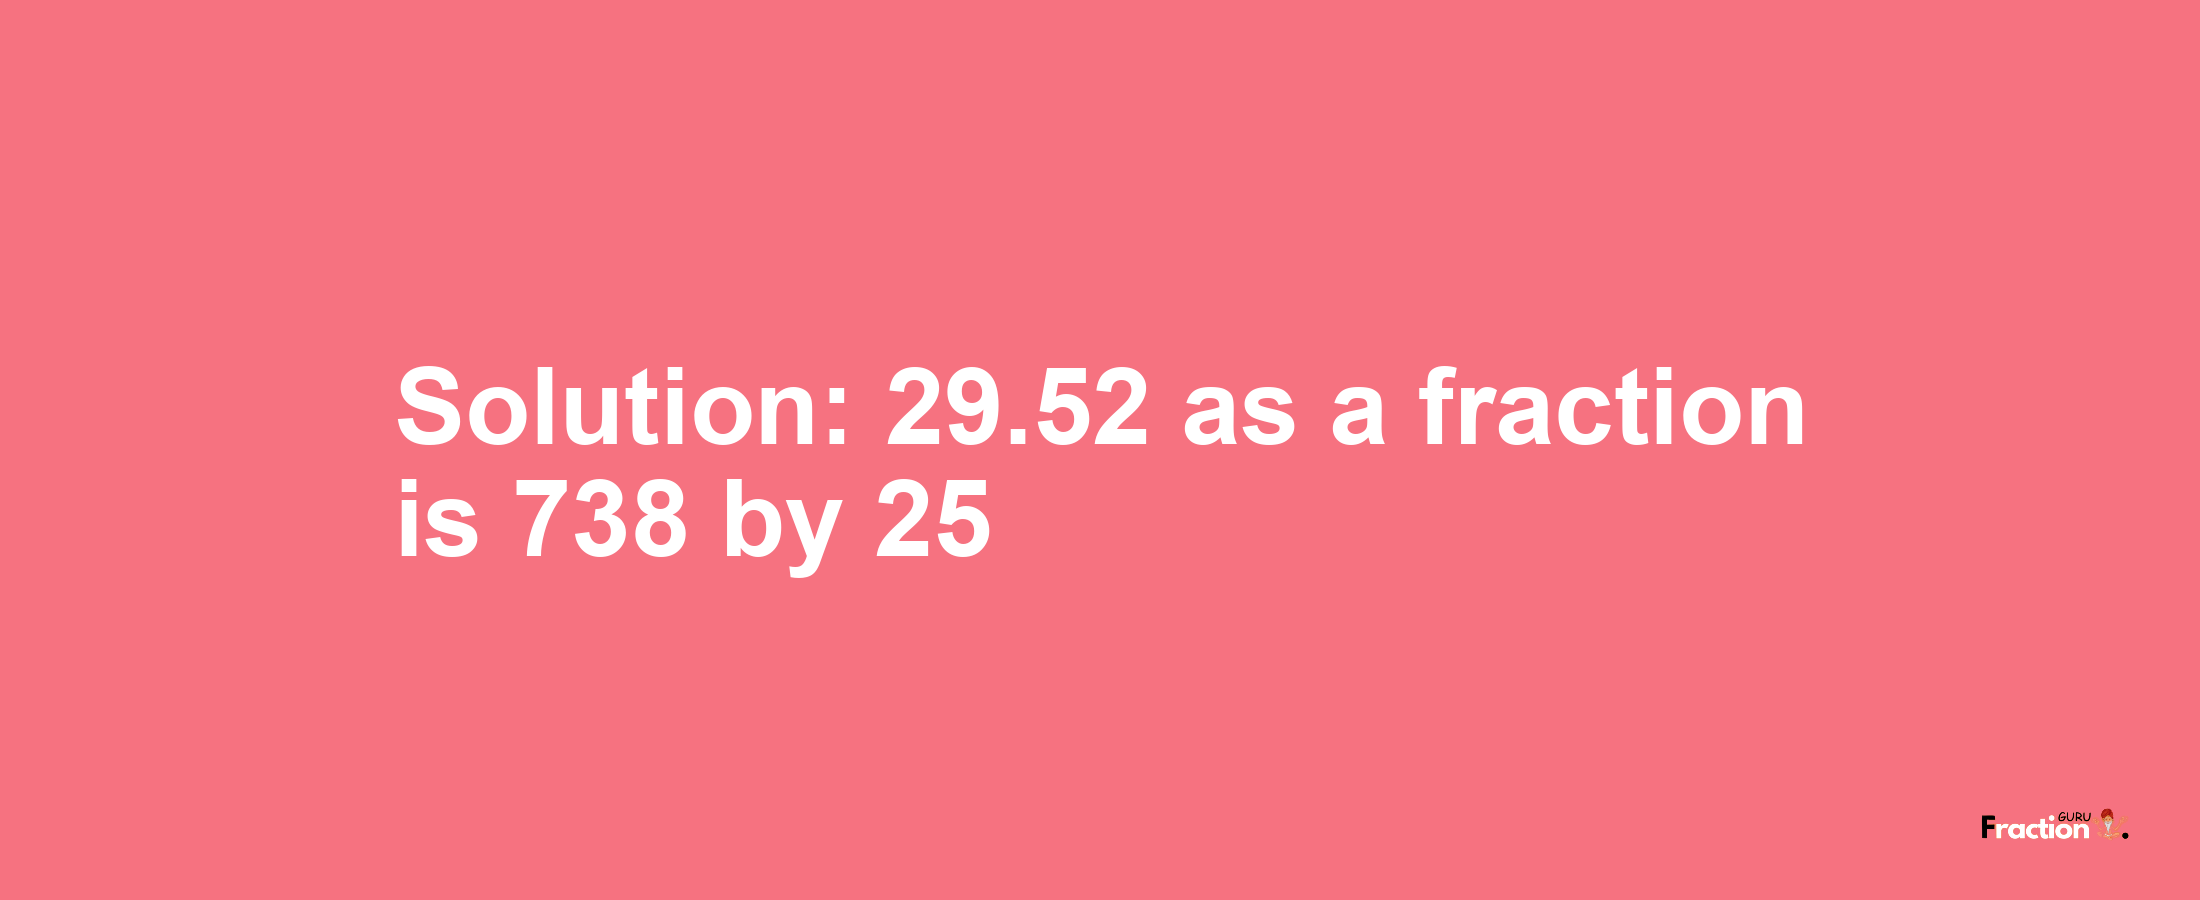 Solution:29.52 as a fraction is 738/25